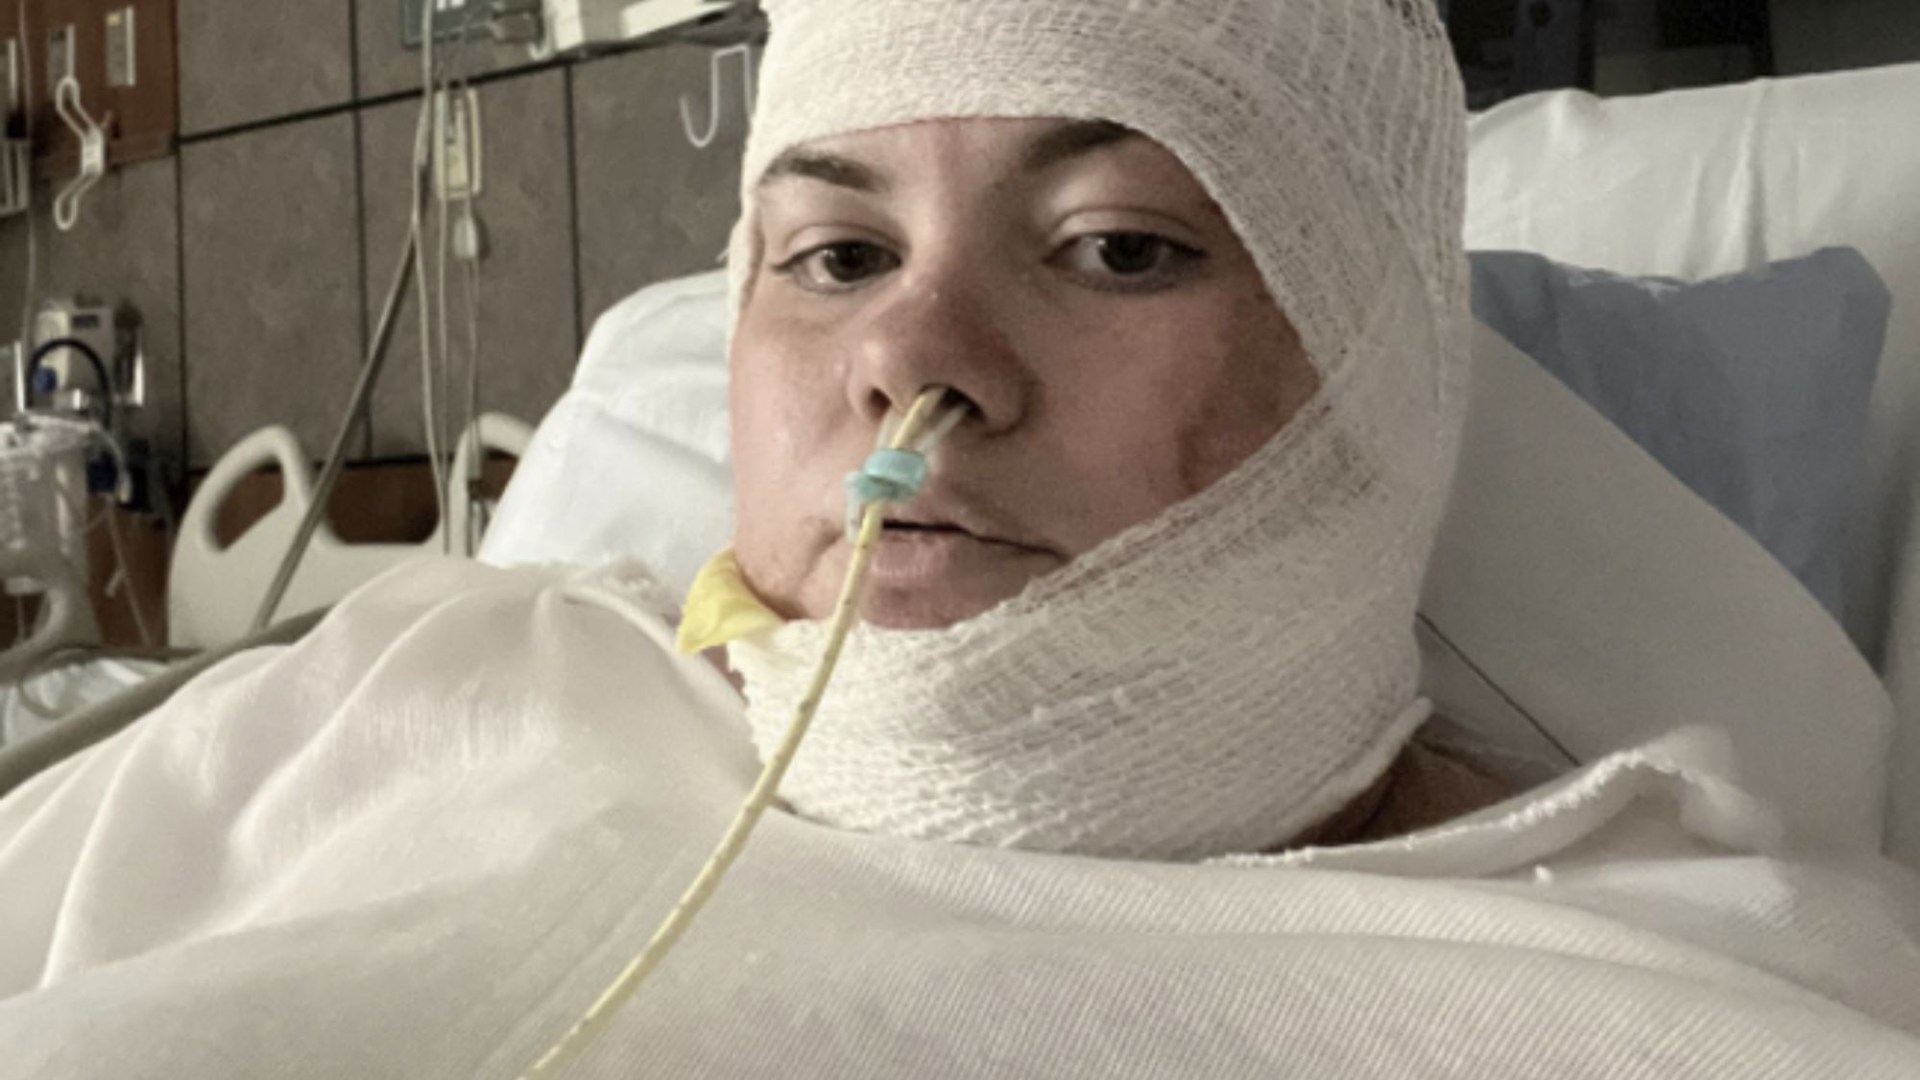 I woke up from coma PREGNANT after chicken fryer accident melted half my skin – docs said to prepare for our funerals [Video]